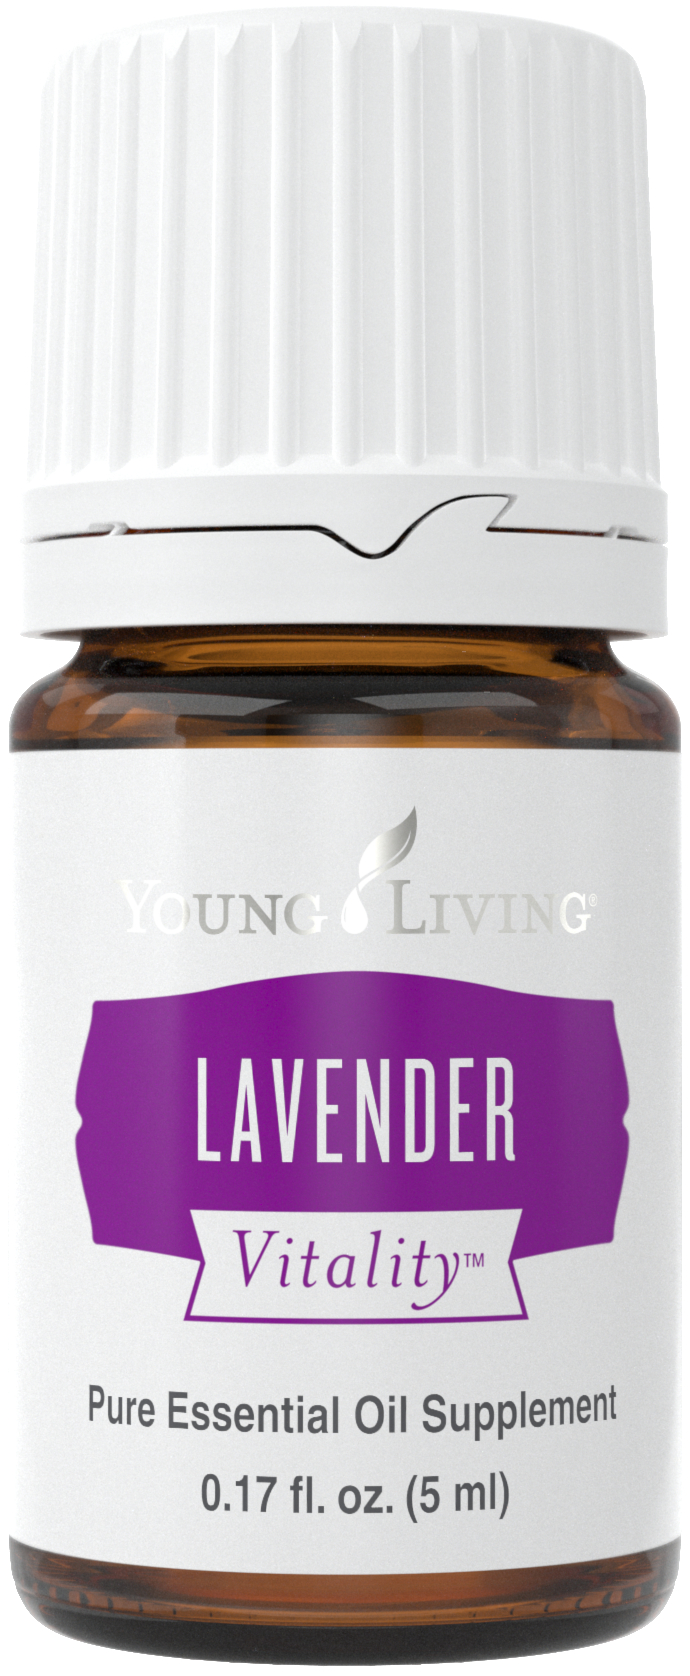 Lavender Vitality Essential Oil - Young Living Lavender Life Blog 